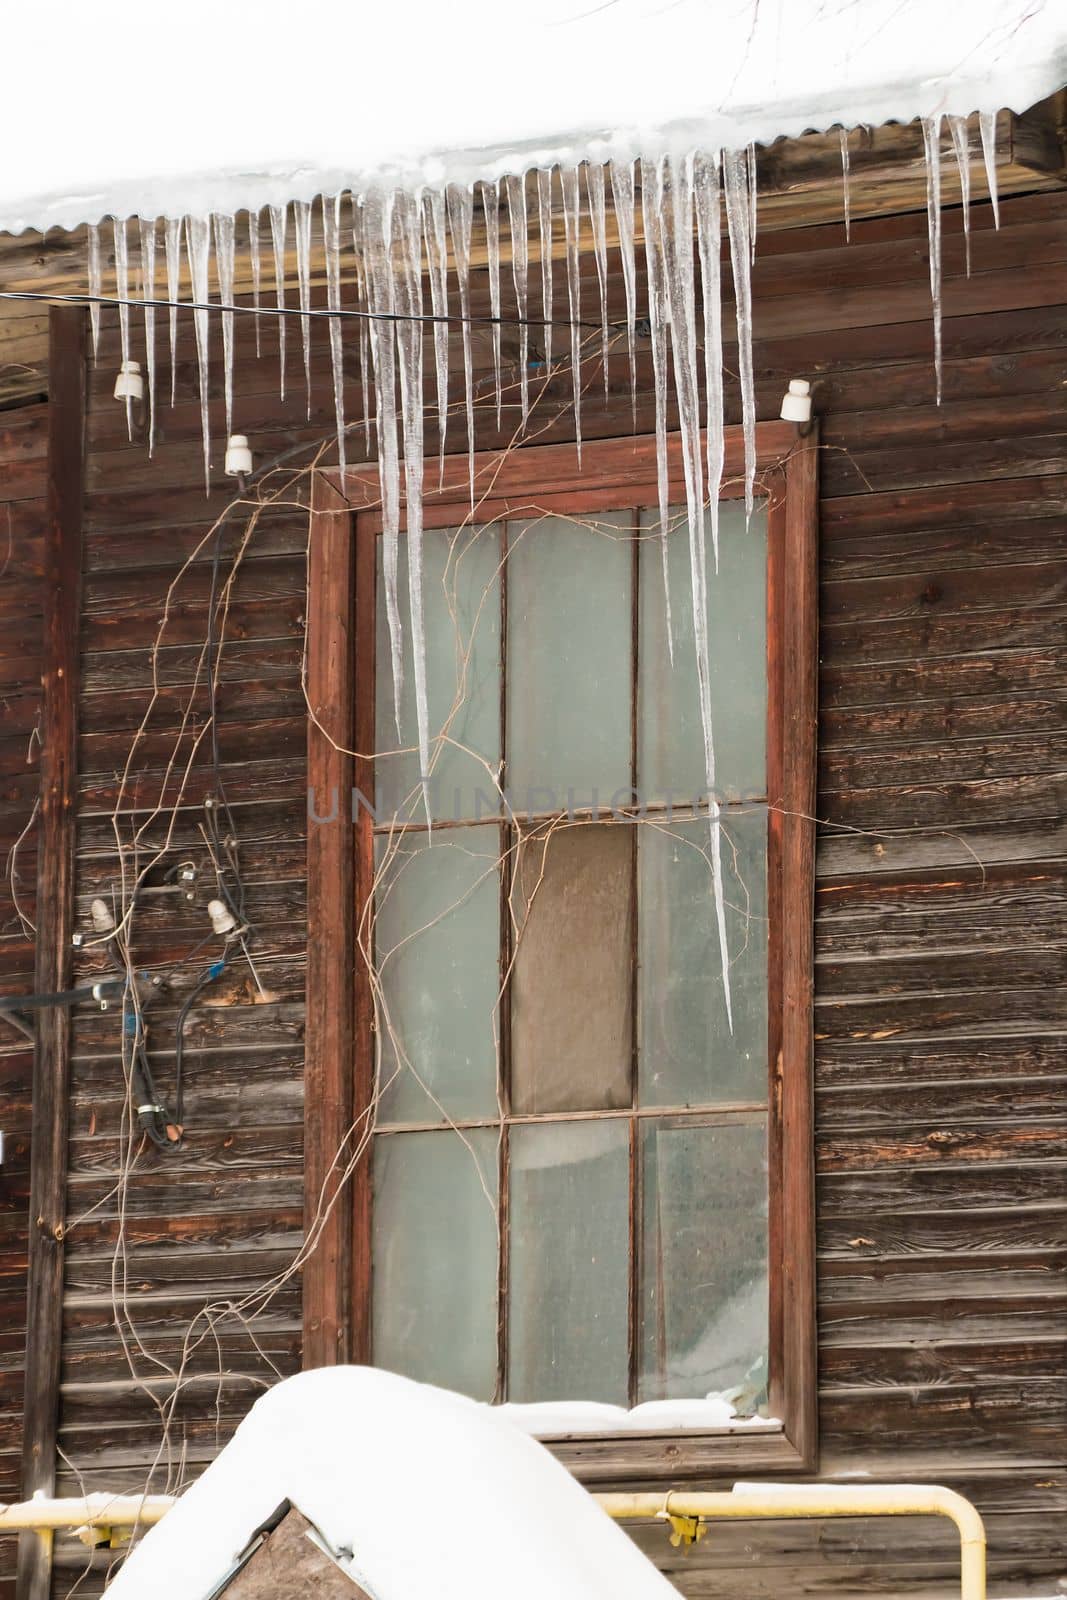 Small icicles hang on the edge of the roof, winter or spring. by anarni33